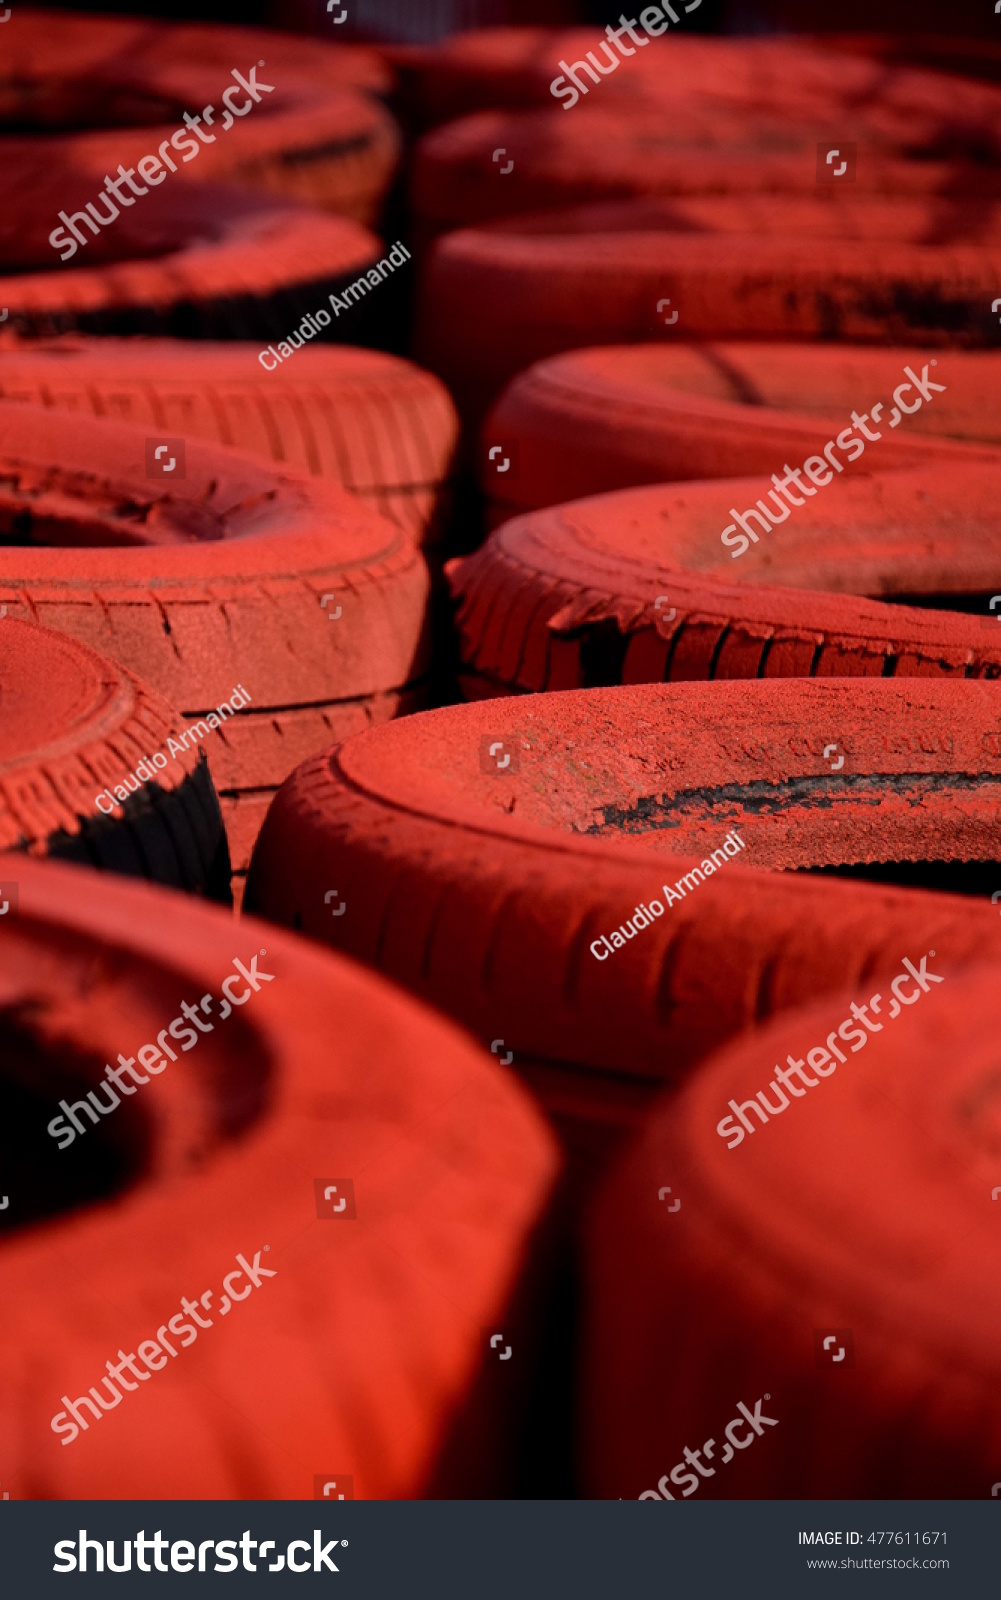 stock-photo-red-tire-barrier-on-a-race-t